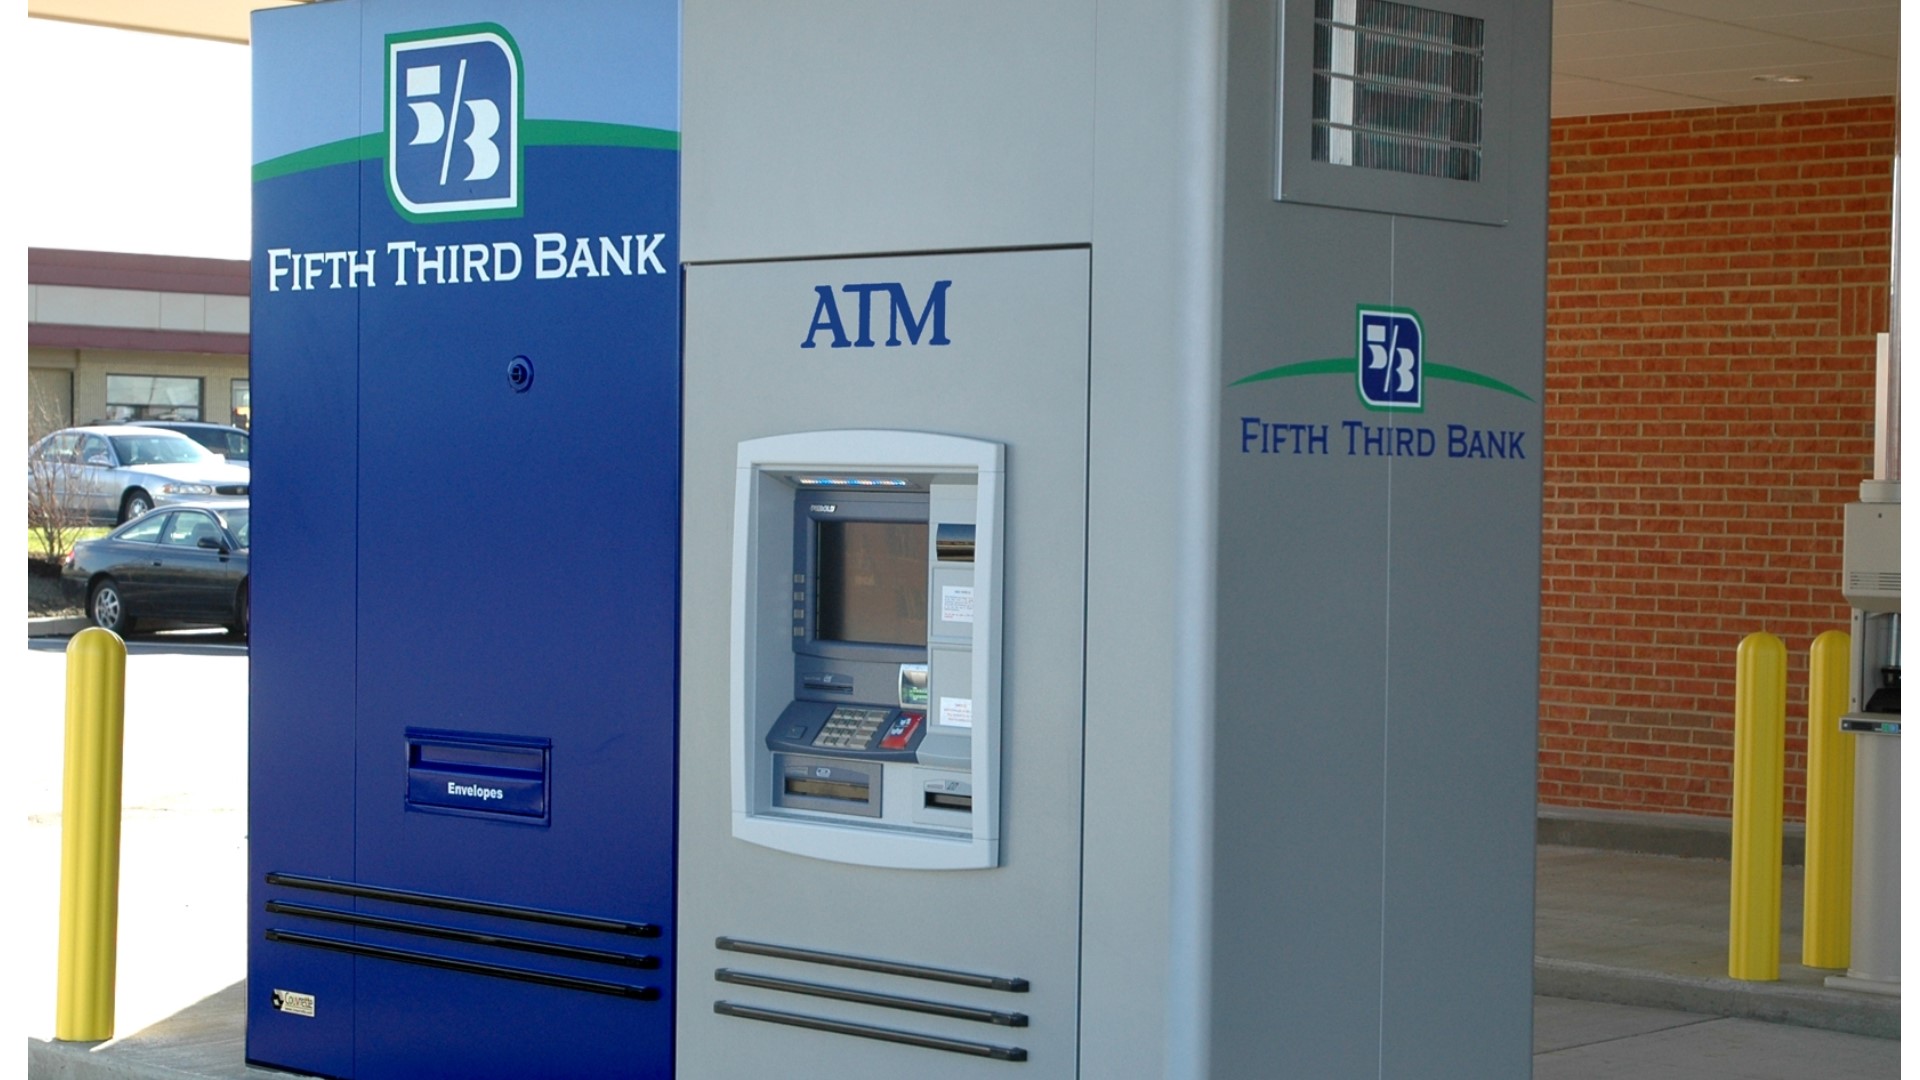 Fifth Third says its system is down